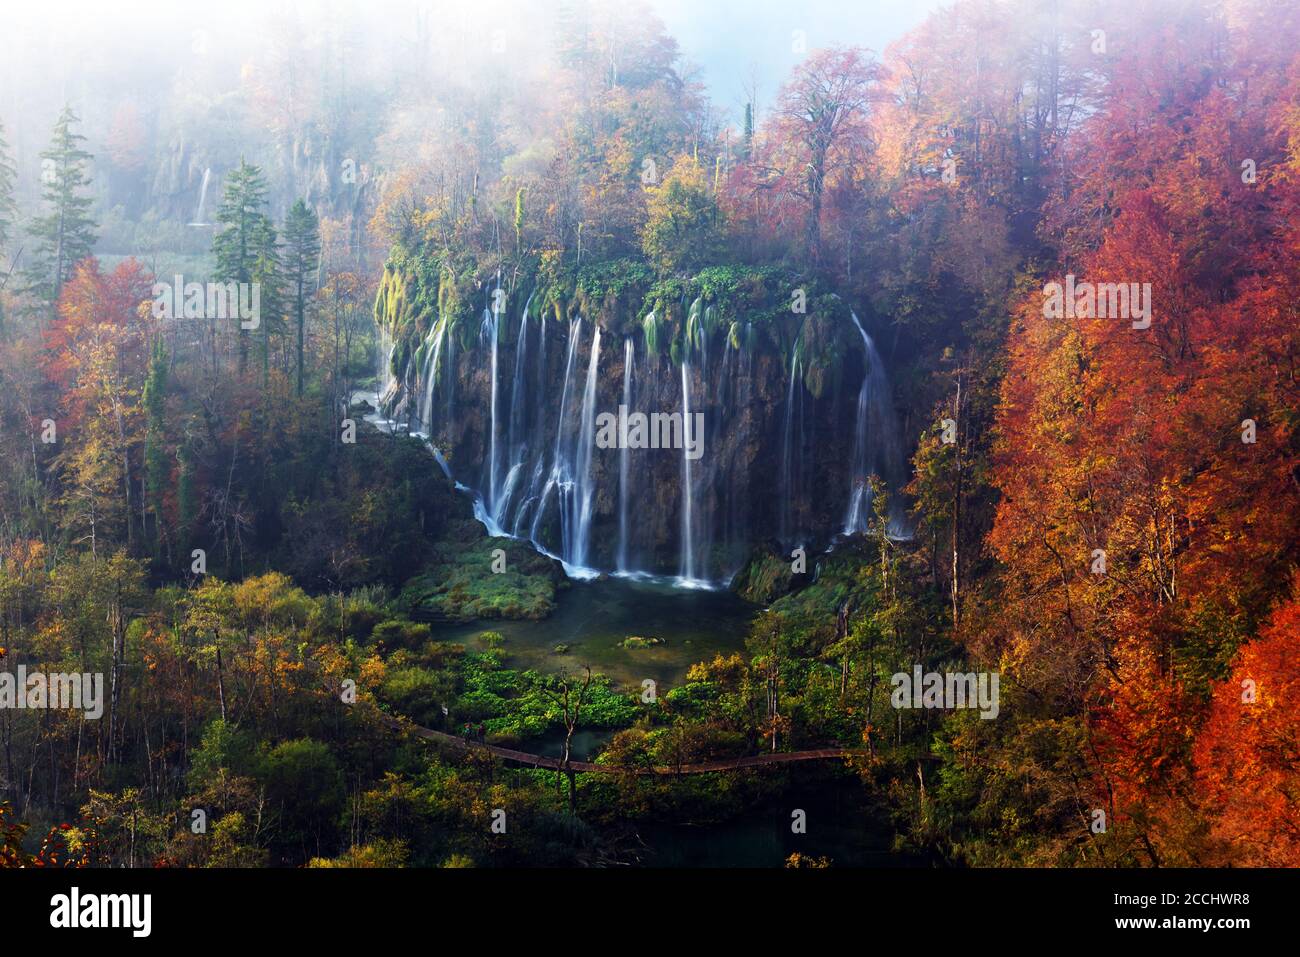 Incredible autumn view on foggy waterfall in Plitvice lakes. Orange forest on background. Plitvice National Park, Croatia. Landscape photography Stock Photo